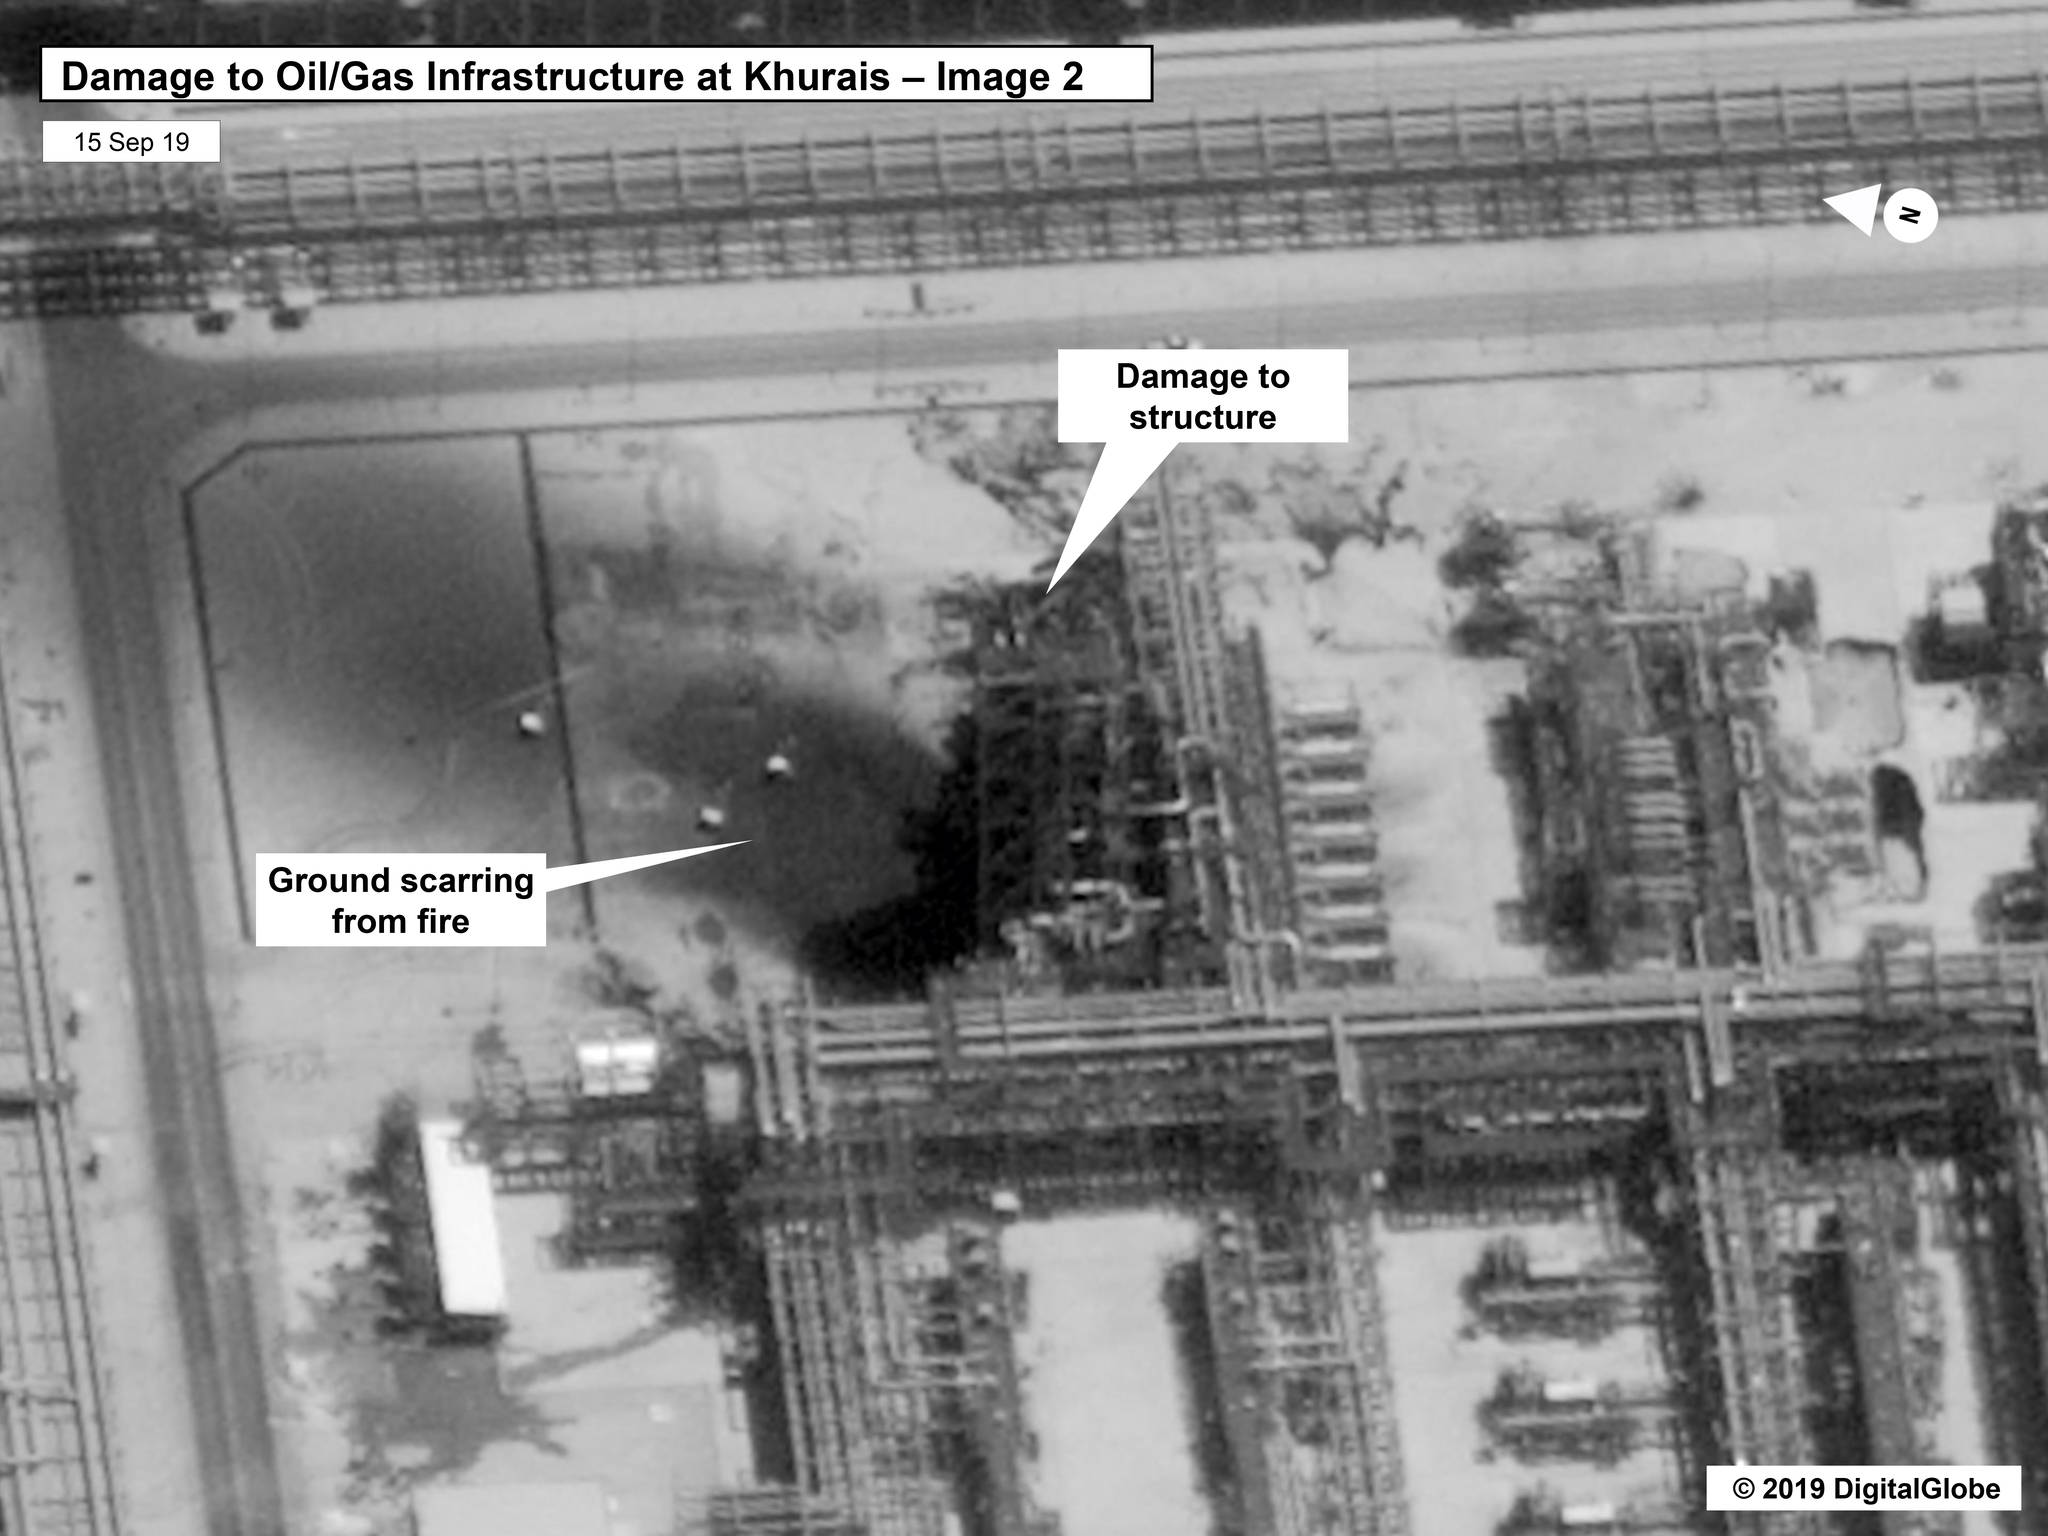 This image provided on Sunday, Sept. 15, 2019, by the U.S. government and DigitalGlobe and annotated by the source, shows damage to the infrastructure at Saudi Aramco’s Kuirais oil field in Buqyaq, Saudi Arabia. The drone attack Saturday on Saudi Arabia’s Abqaiq plant and its Khurais oil field led to the interruption of an estimated 5.7 million barrels of the kingdom’s crude oil production per day, equivalent to more than 5% of the world’s daily supply. (U.S. government/Digital Globe via AP)